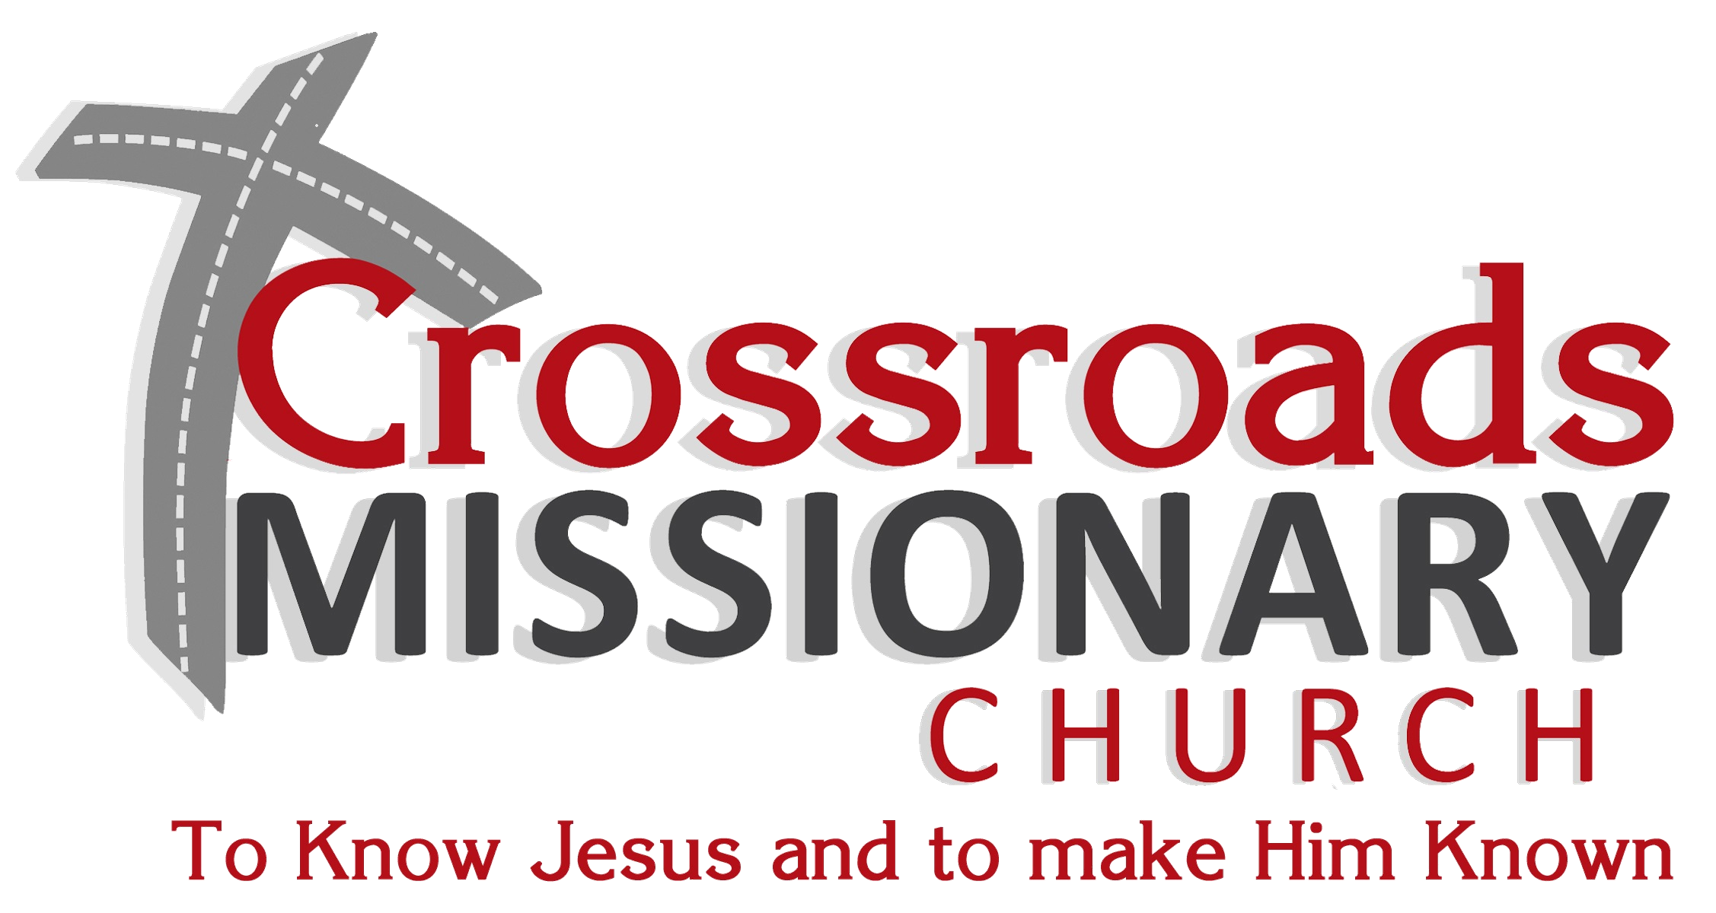 Crossroads Missionary Church - Home Page